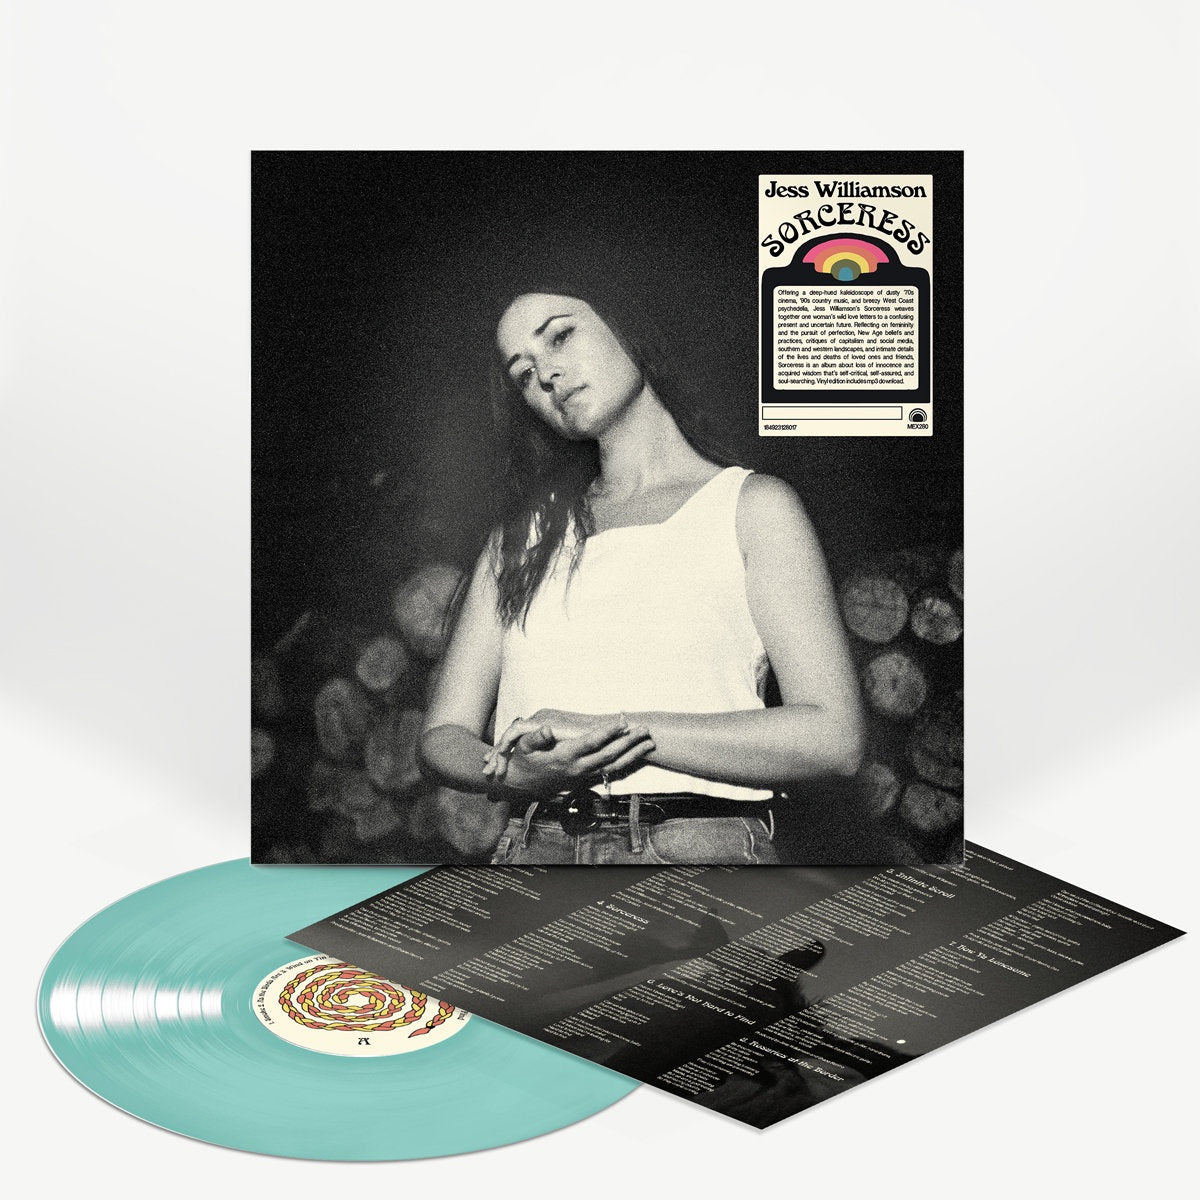 Jess Williamson - Sorceress - New Lp Record 2020 Mexican Summer Indie Exclusive Crystal Ball Blue Vinyl & Download - Indie Rock / Folk Rock / Psychedelic